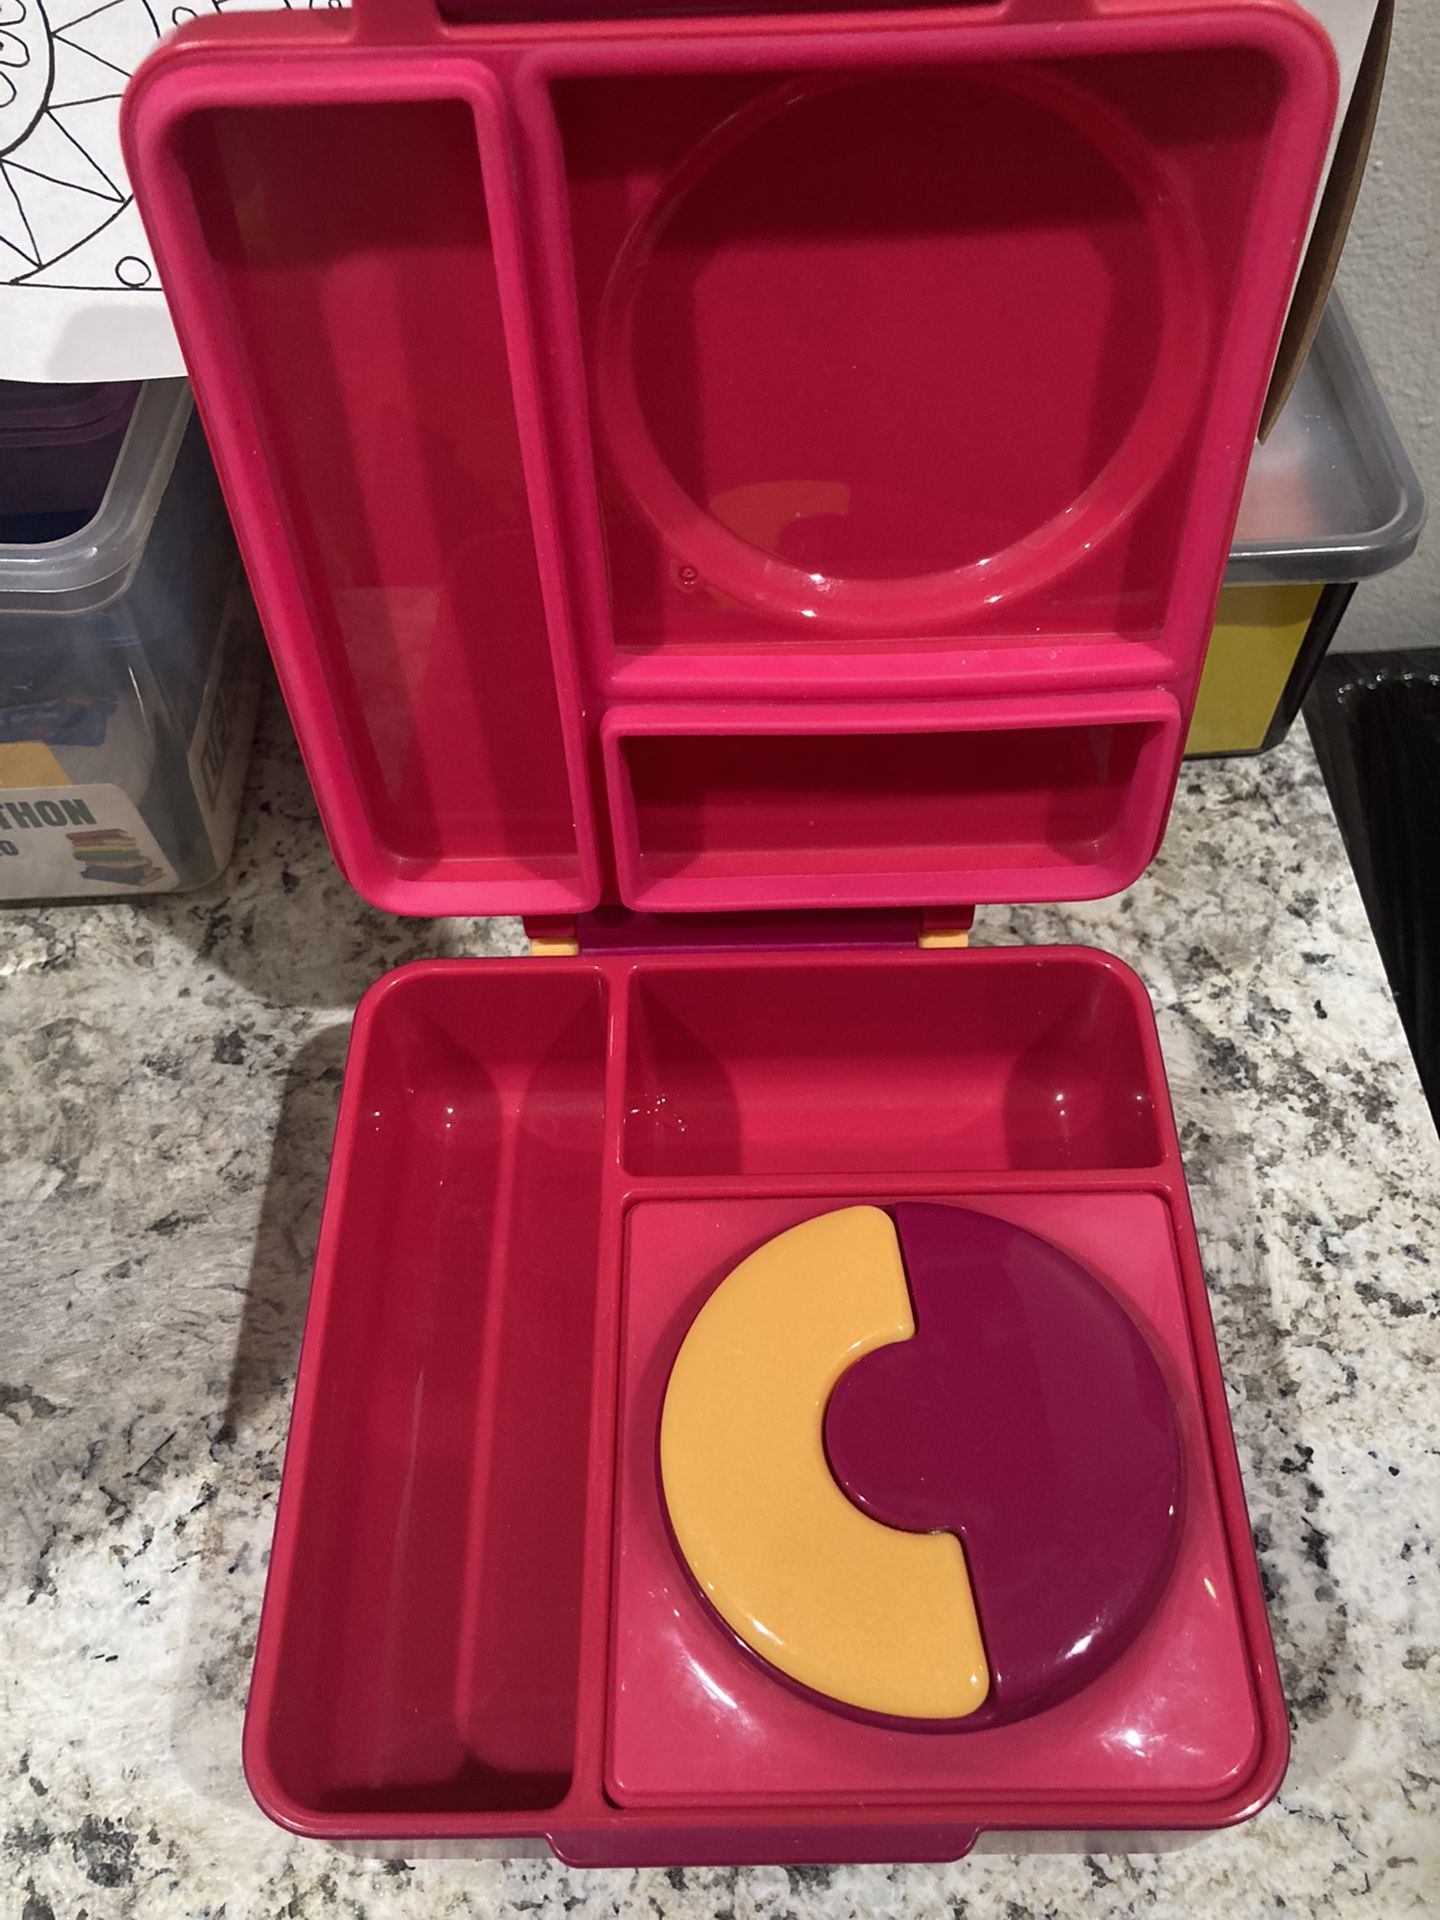 Omiebox Lunch Box For Kids for Sale in Grand Prairie, TX - OfferUp